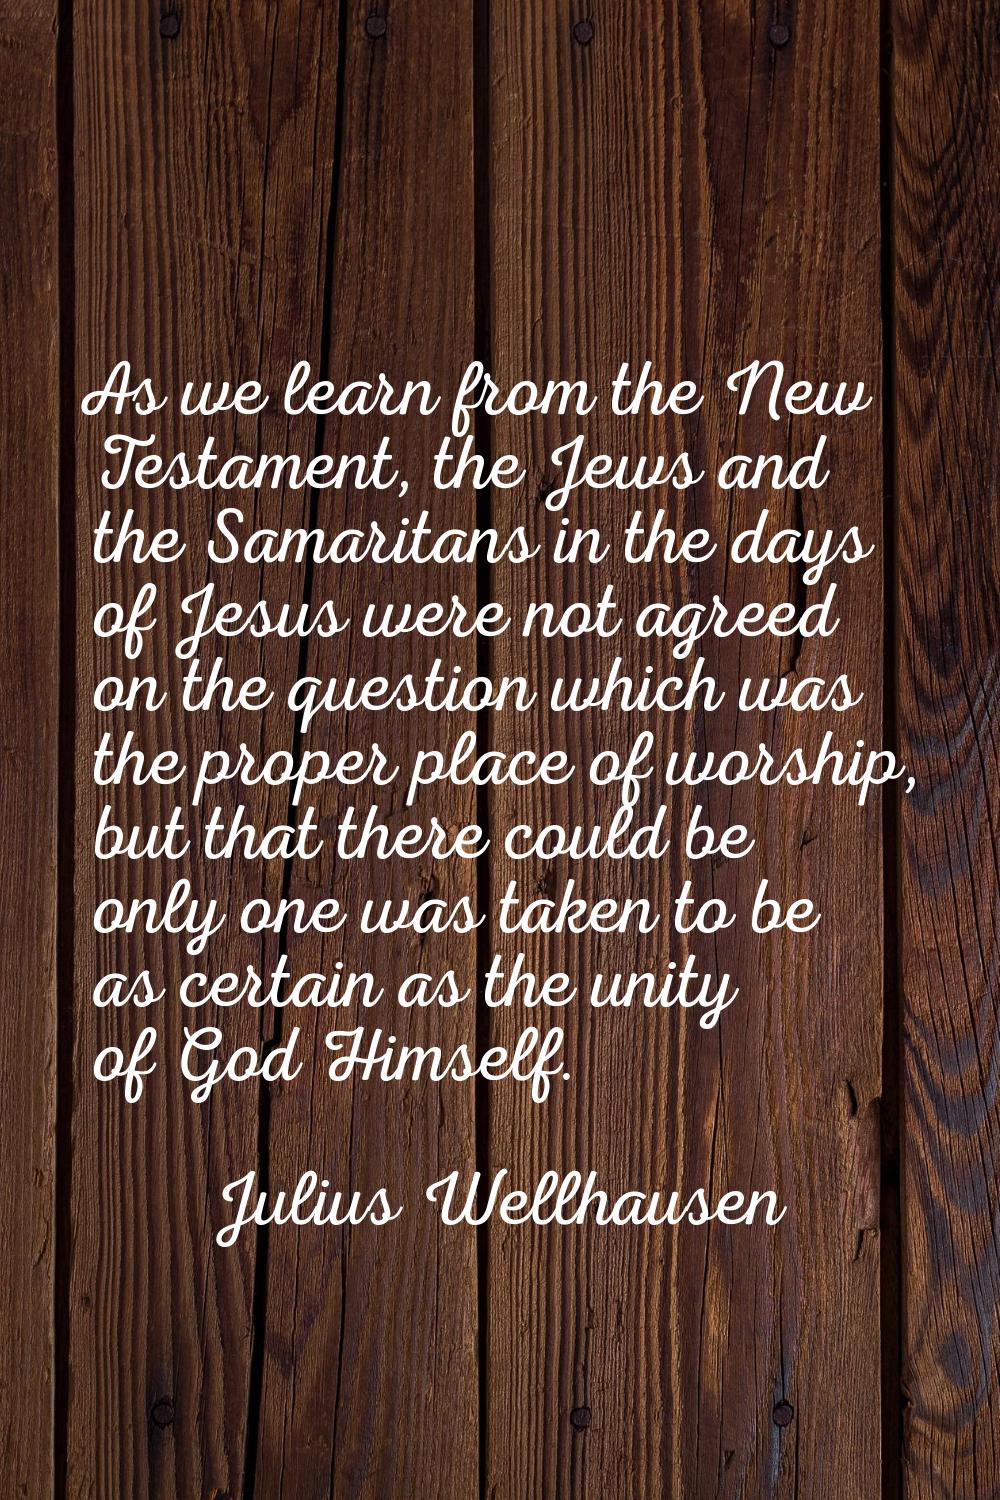 As we learn from the New Testament, the Jews and the Samaritans in the days of Jesus were not agree